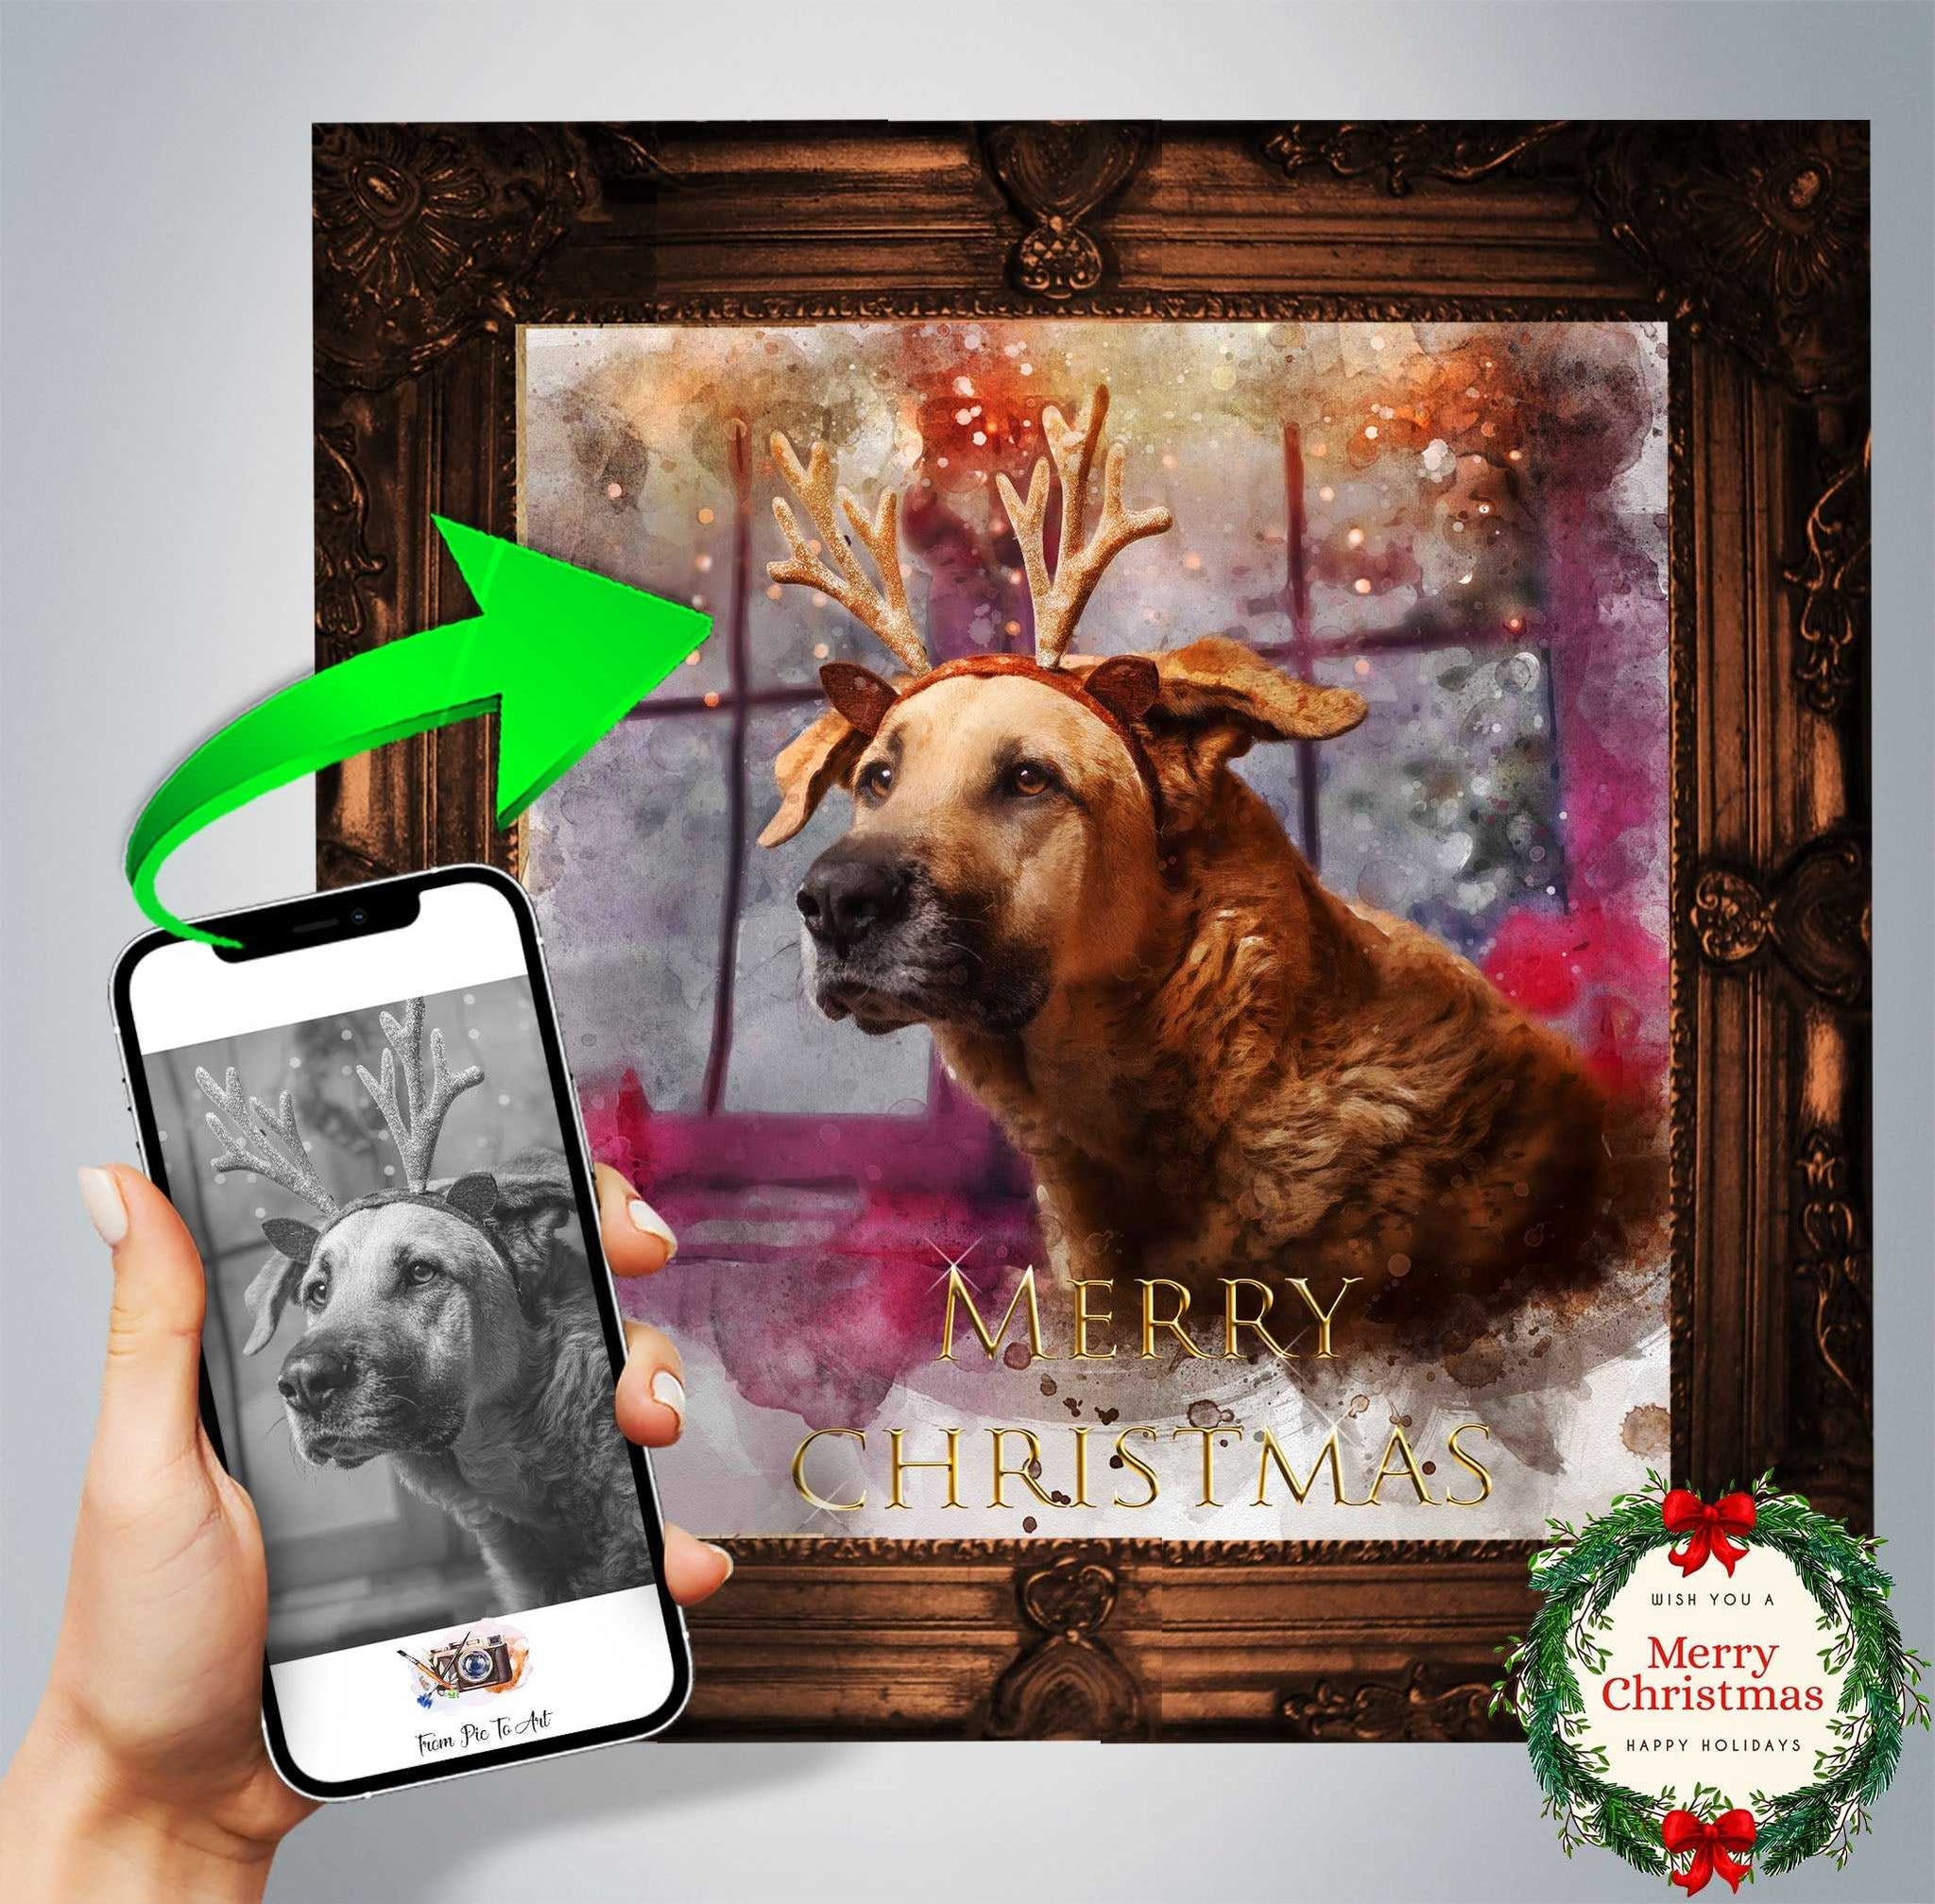 Ideas for Christmas Gifts | Christmas Presents | Christmas Gift Suggestions - FromPicToArt